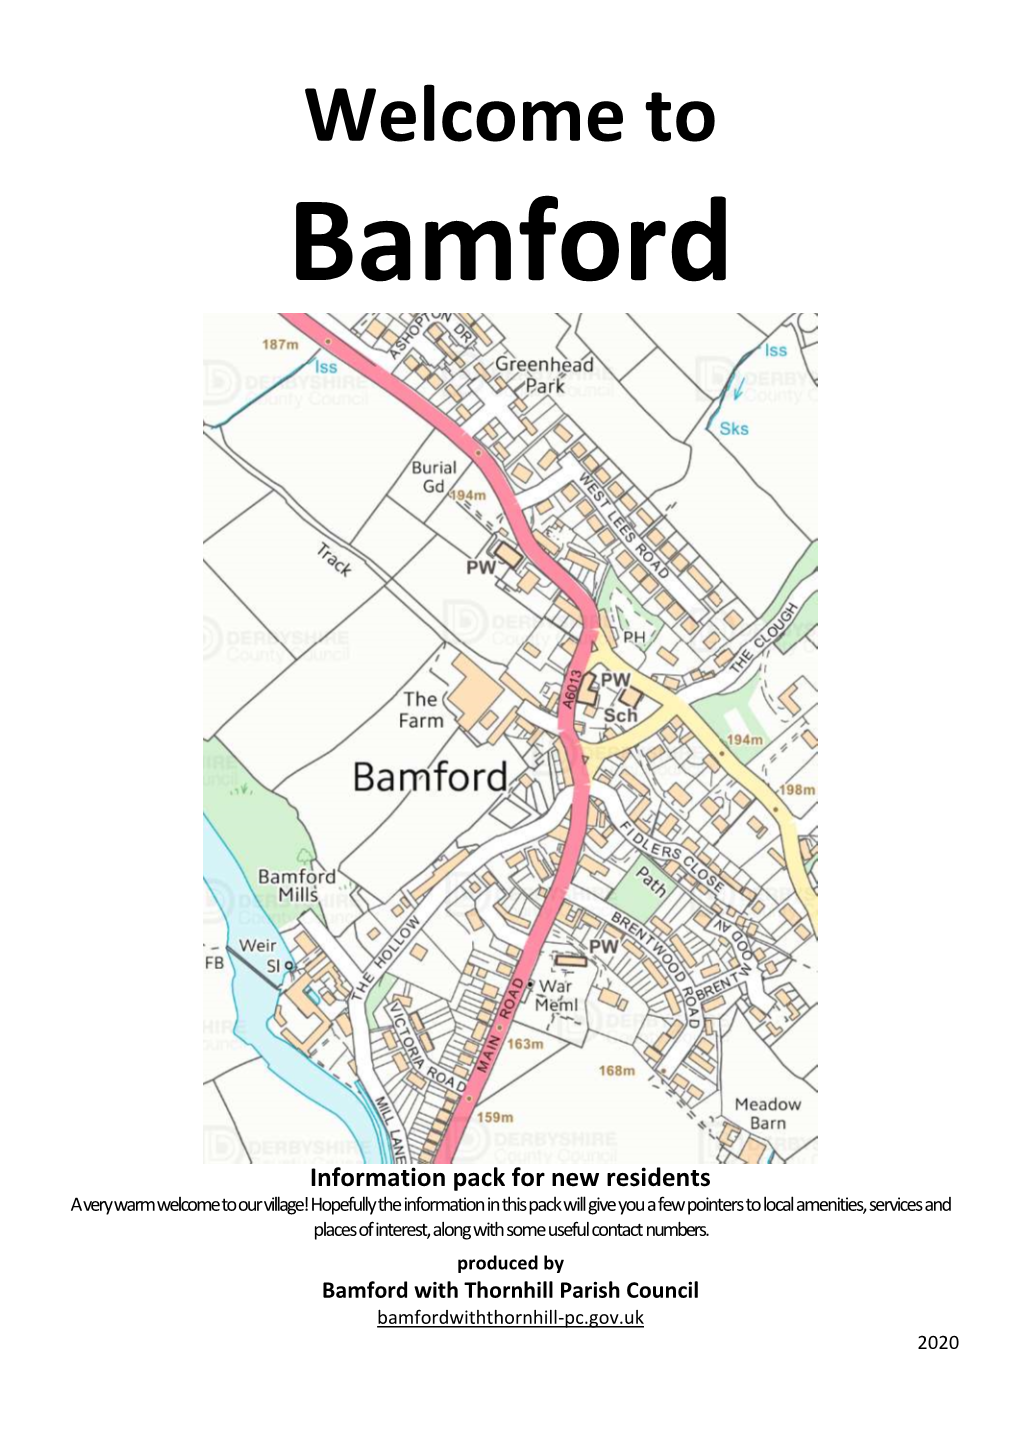 Welcome to Bamford Information Pack for New Residents